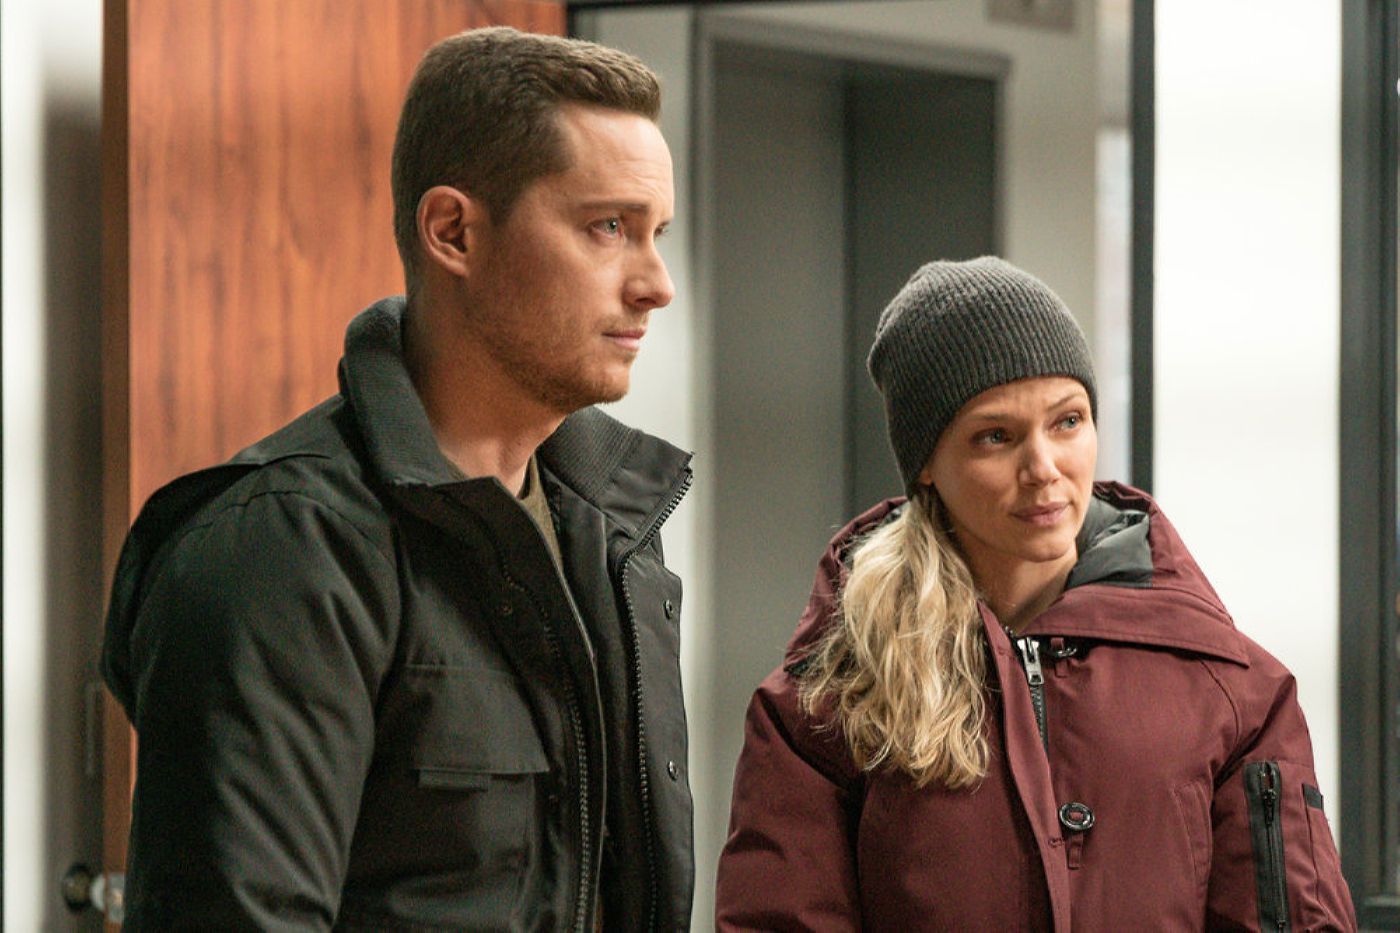 Chicago PD - Equal Justice - Review.